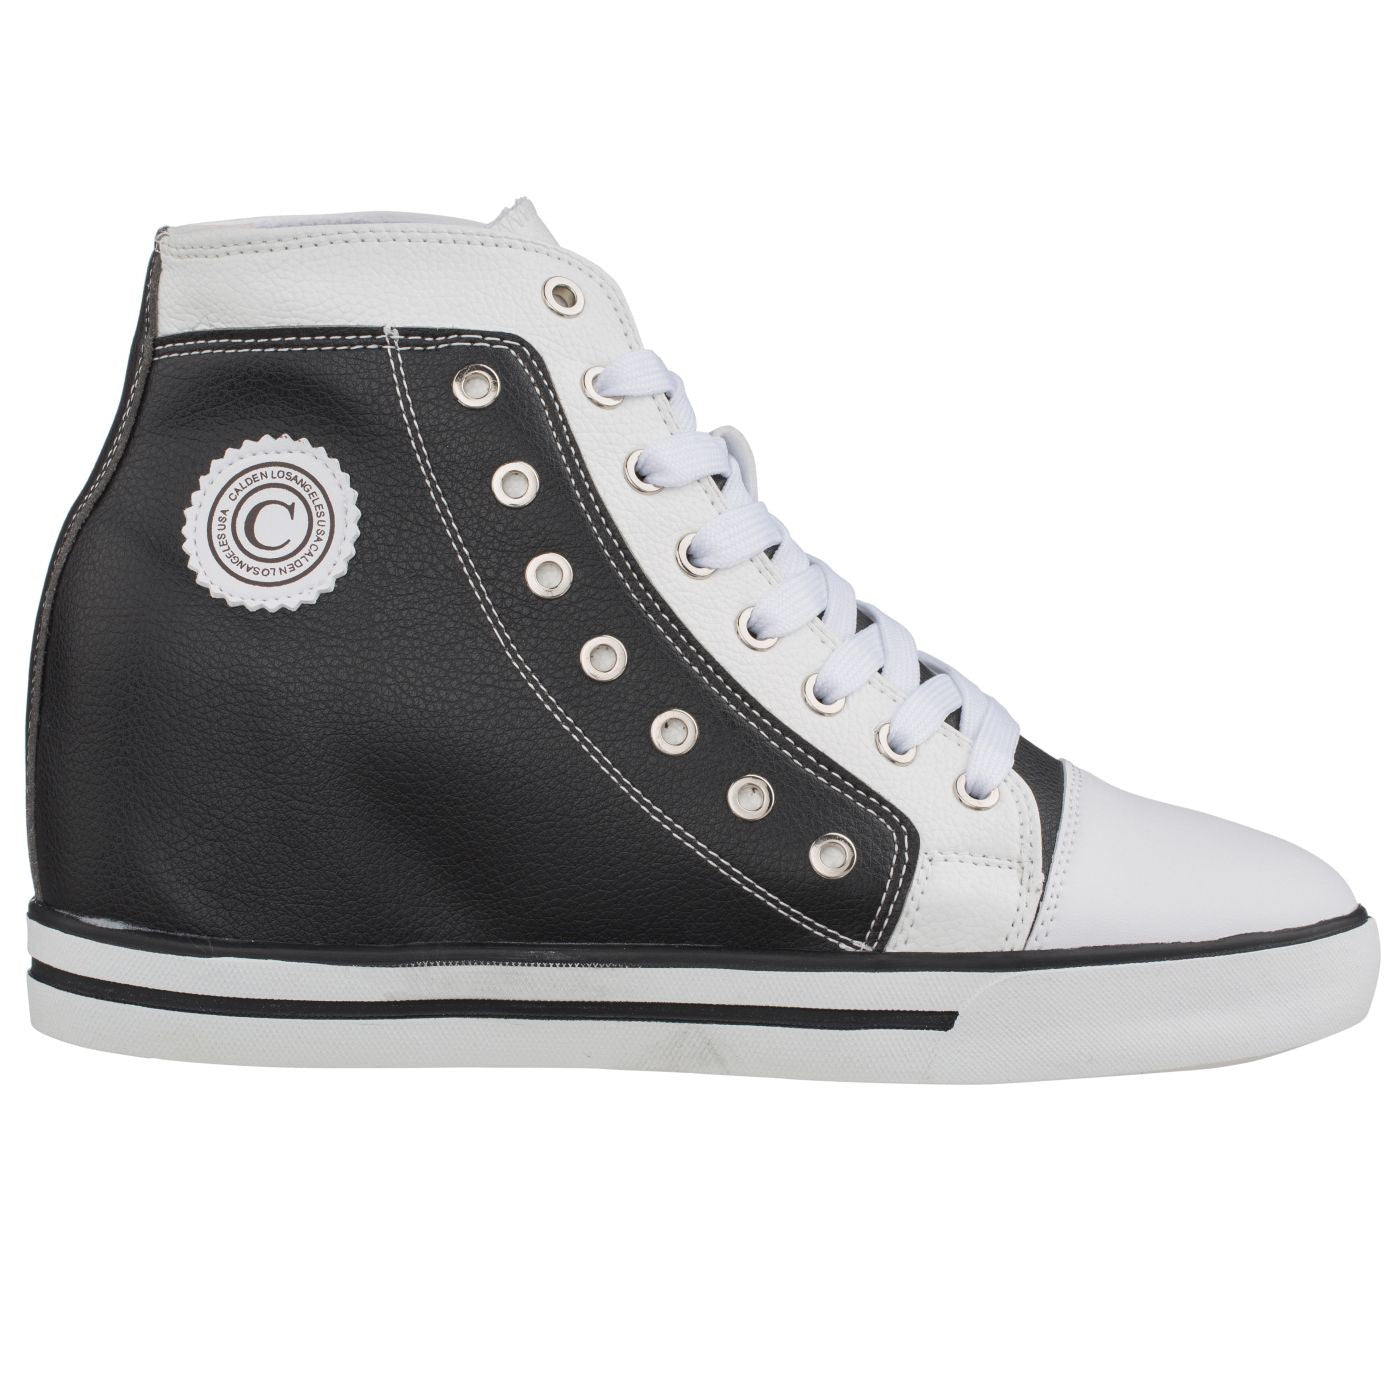 Elevator shoes height increase CALDEN Casual Canvas High-Top Sneakers - 3.8 Inches - K882895